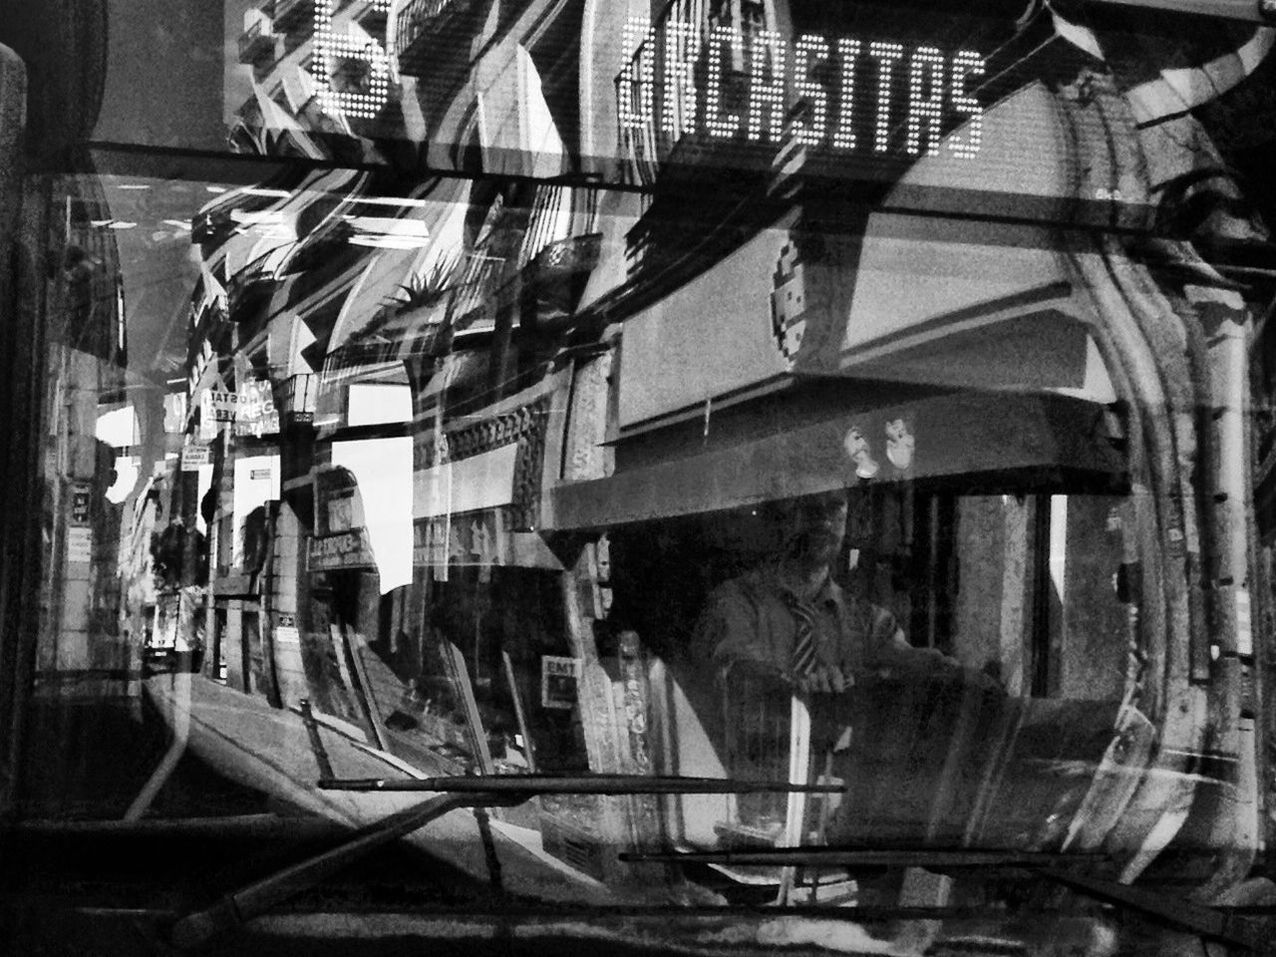 Reflection on buses